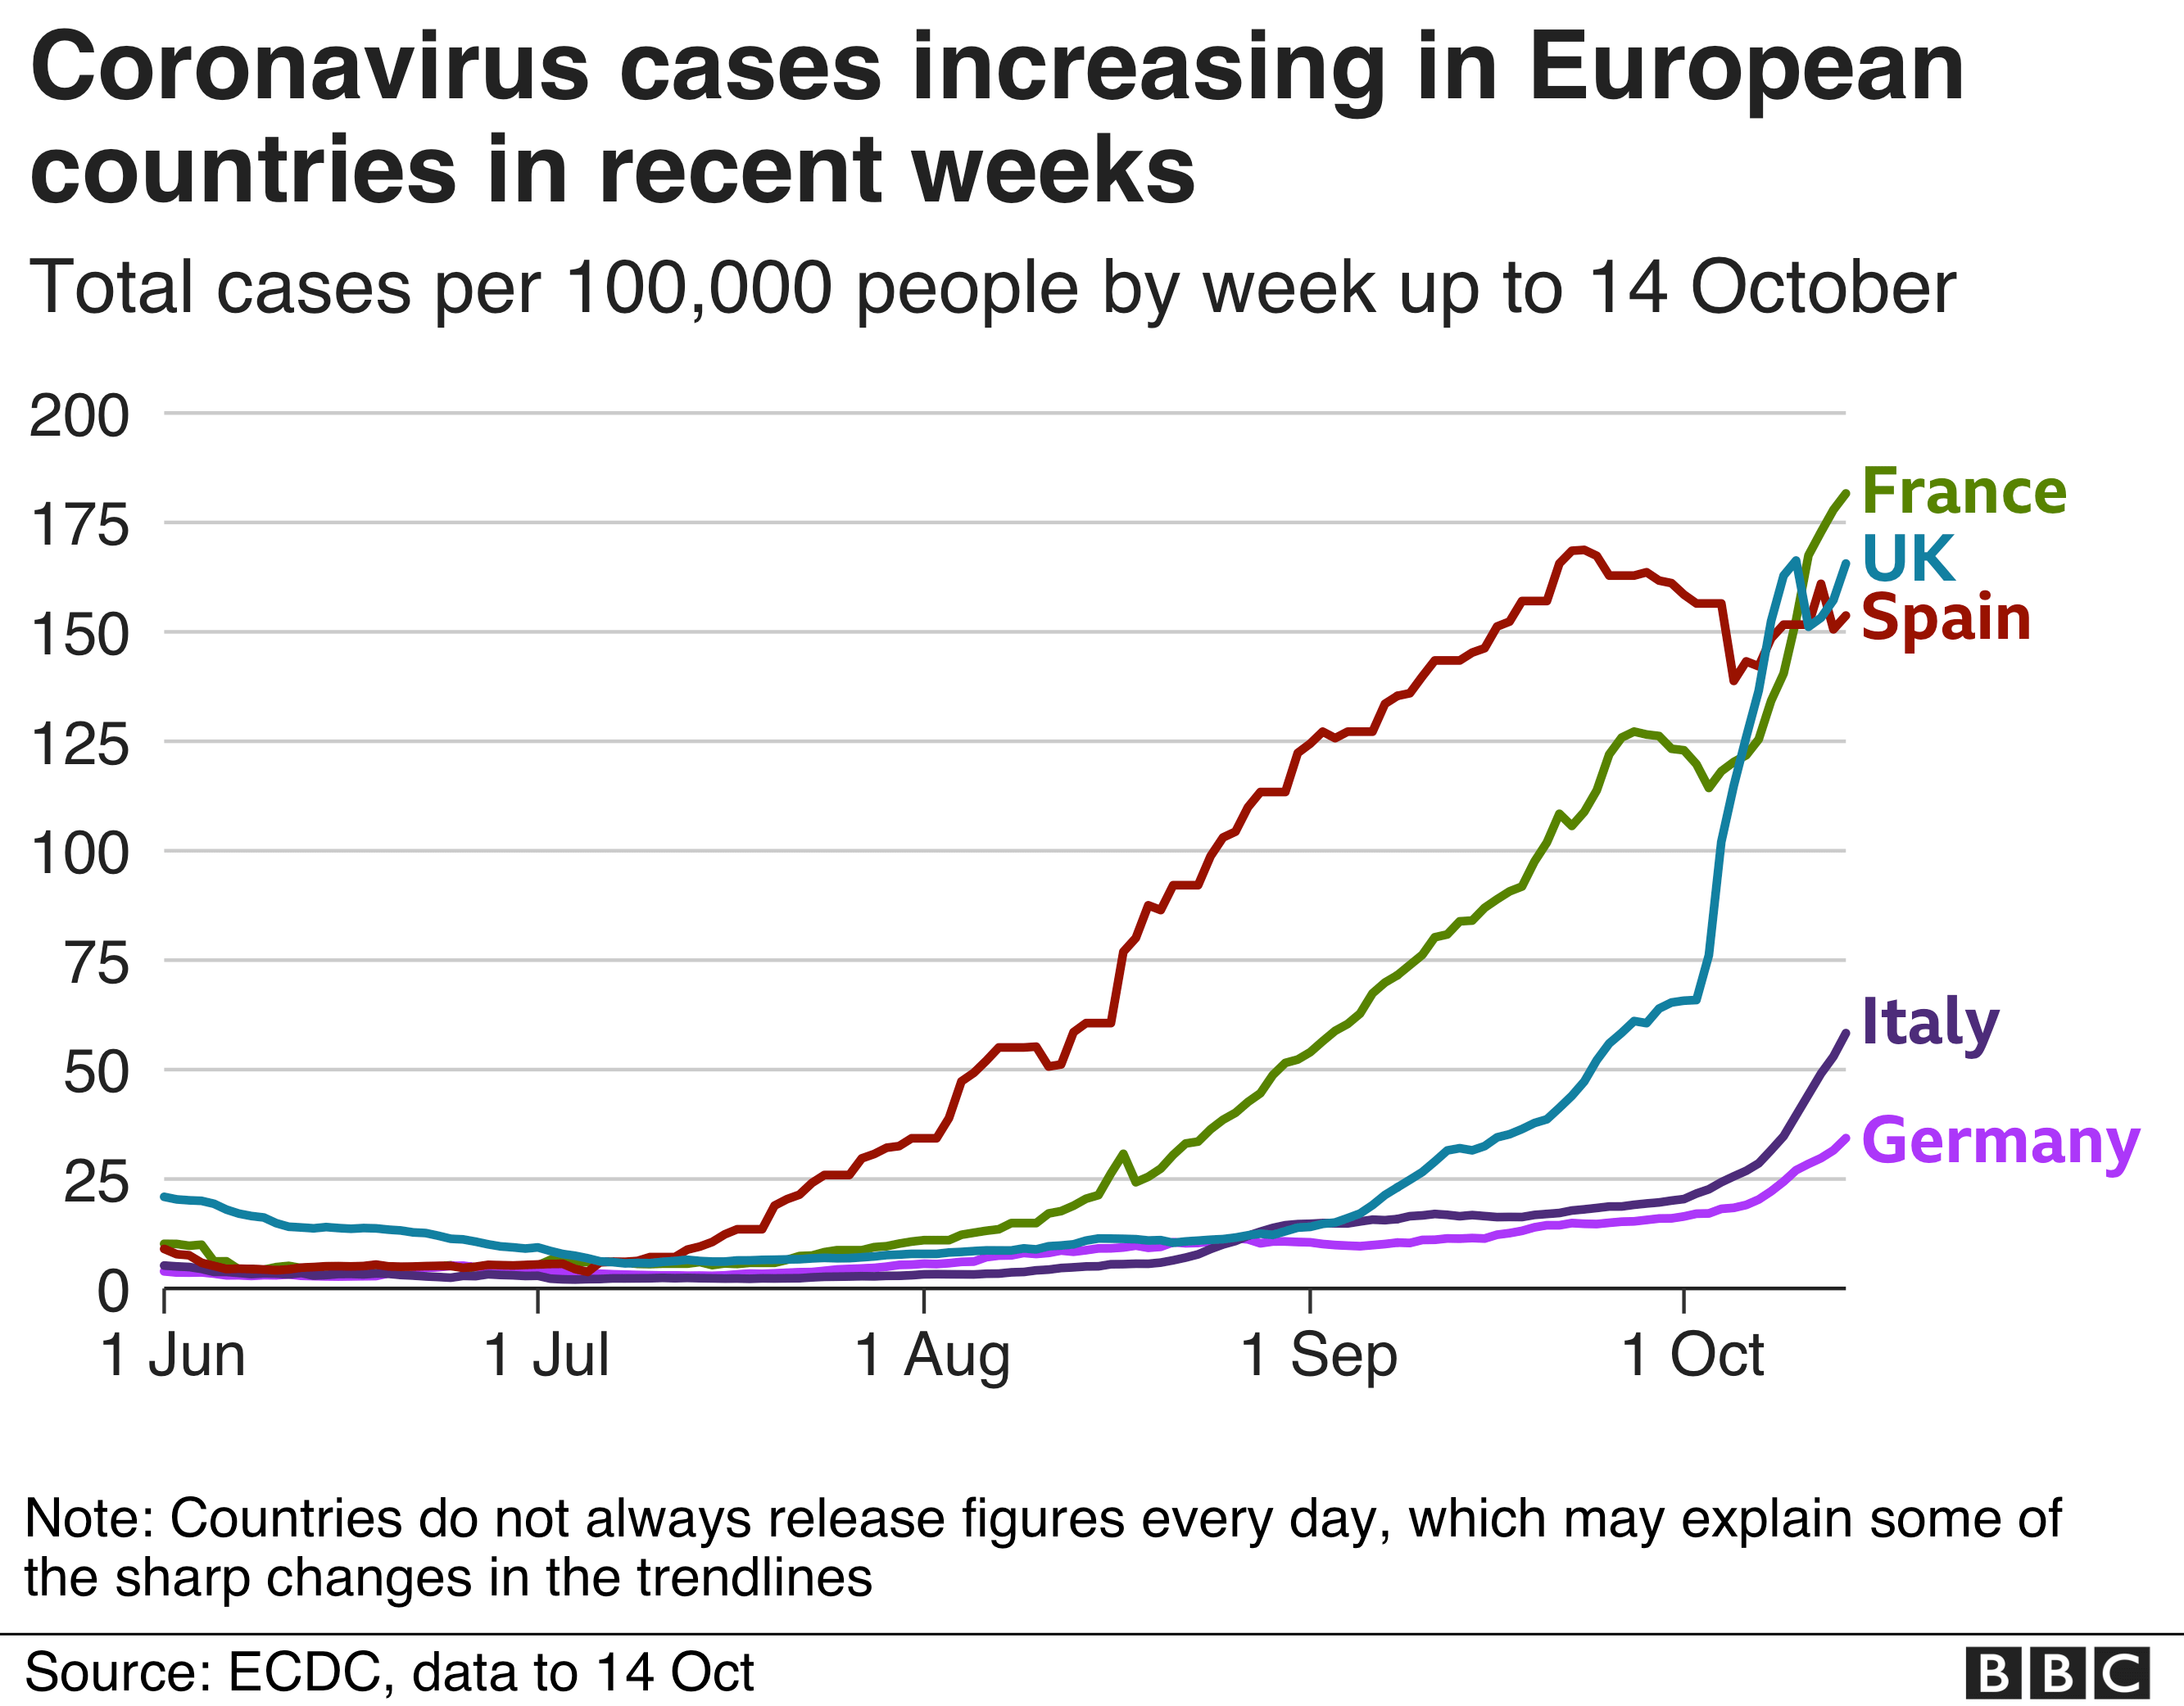 Line chart showing cases increasing in France. UK, Spain, Italy and Germany